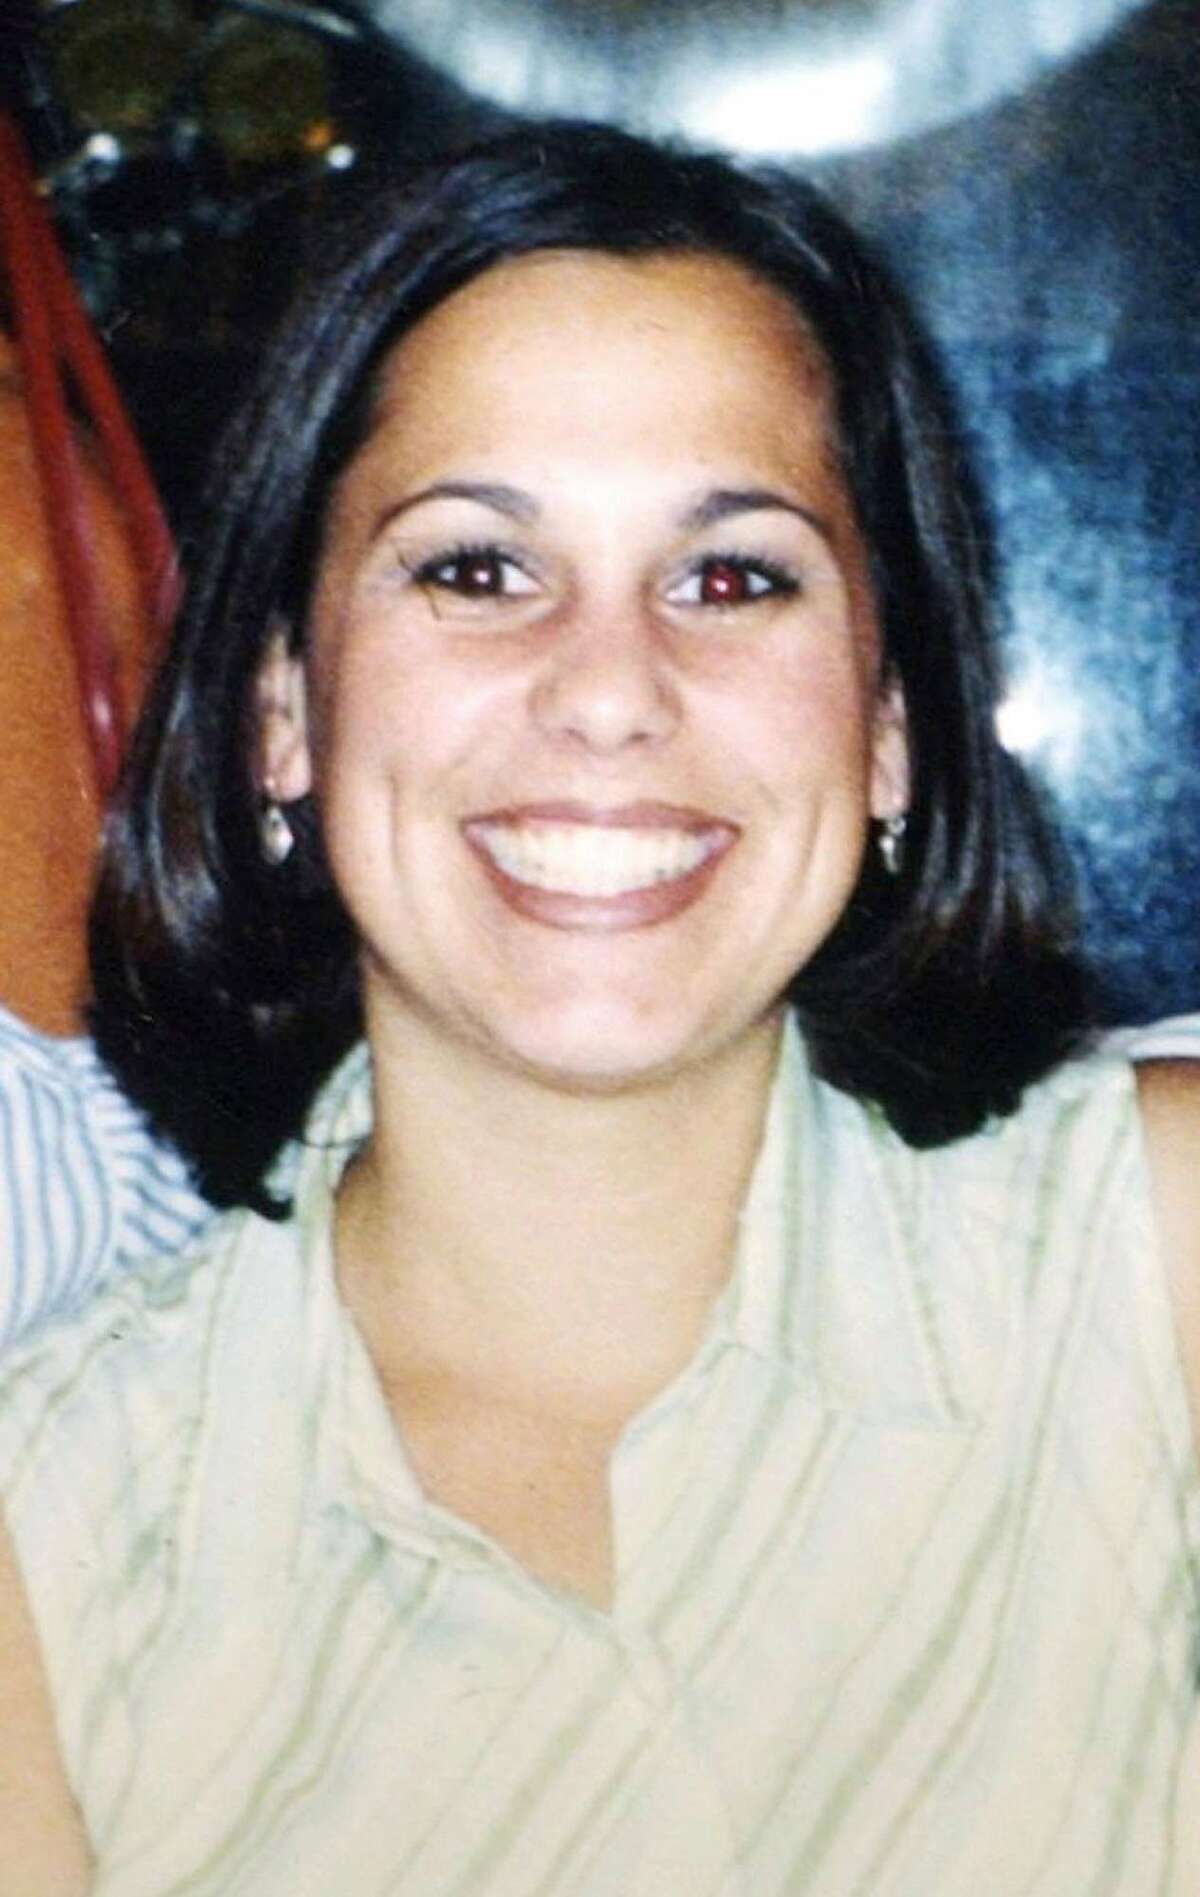 This undated handout photo from the Modesto (Calif.) Police Department shows Laci Peterson. Ten months after the pregnant woman vanished from her Modesto home, prosecutors are about to lay out the evidence that her husband, Scott Peterson, murdered her and their unborn son and sent them to a watery grave in San Francisco Bay. A preliminary hearing to determine whether there is enough evidence to try Peterson on murder charges starts Wednesday, Oct. 29, 2003. (AP Photo/The Modesto Bee, Modesto Police Department Handout, File) **NO SALES, MAGS OUT, ONLINE OUT, TV OUT, NO SALES**